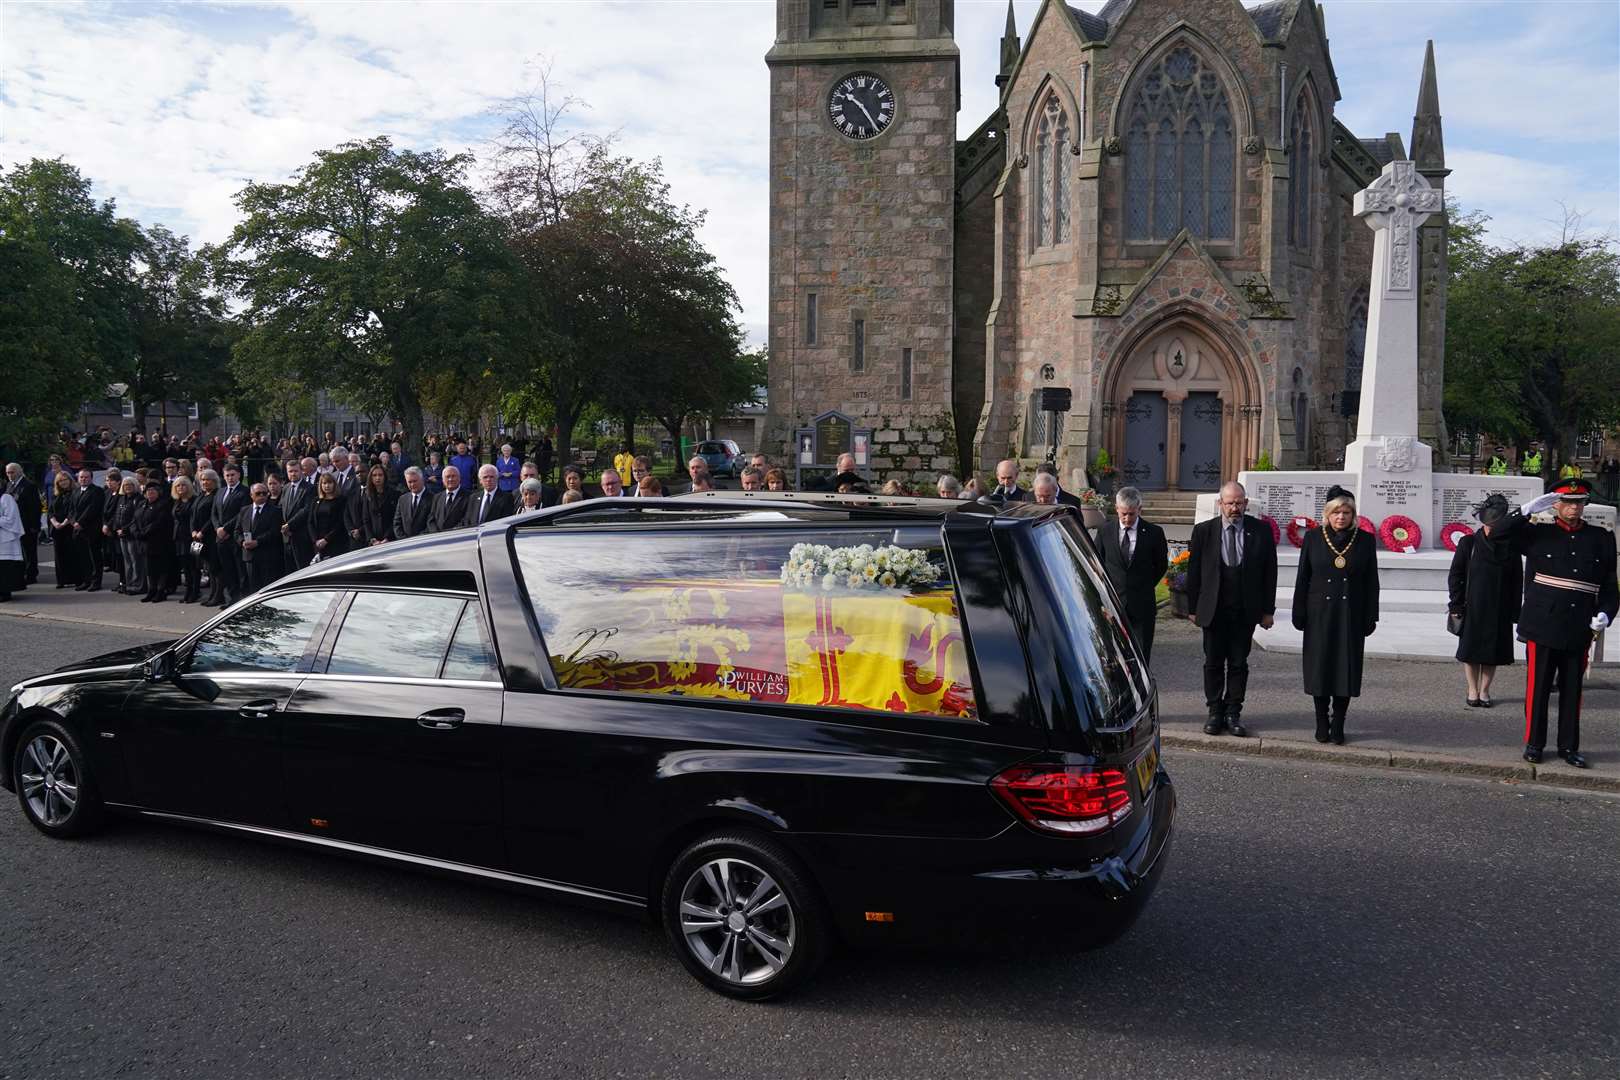 The hearse carrying the coffin of Queen Elizabeth II (Andrew Milligan/PA)